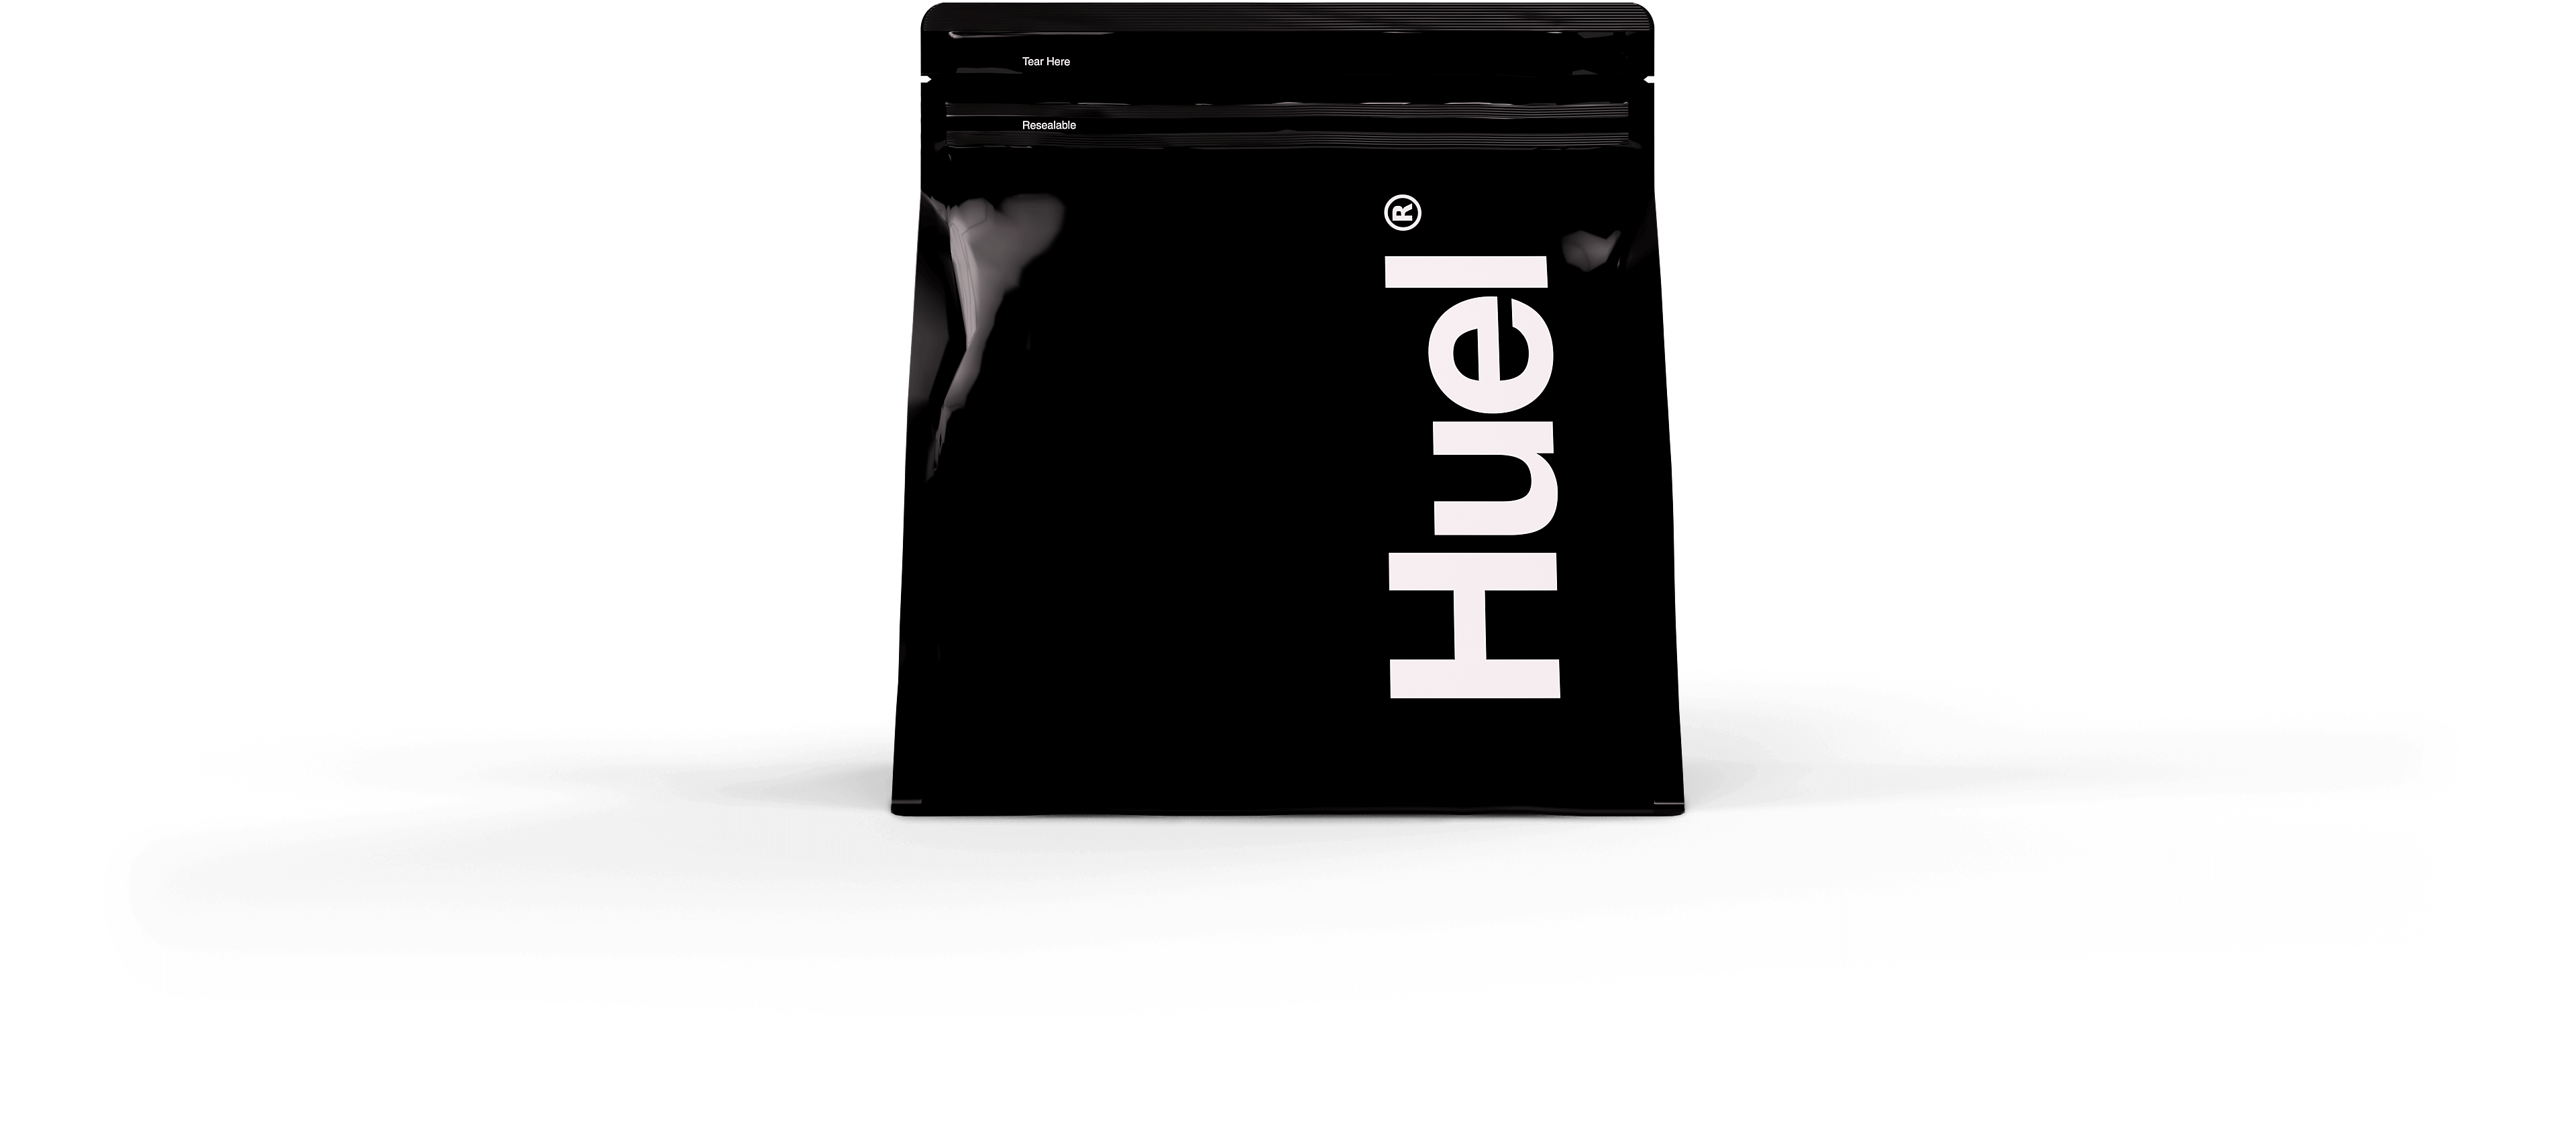 Apple Health and scales - Weight loss - Huel